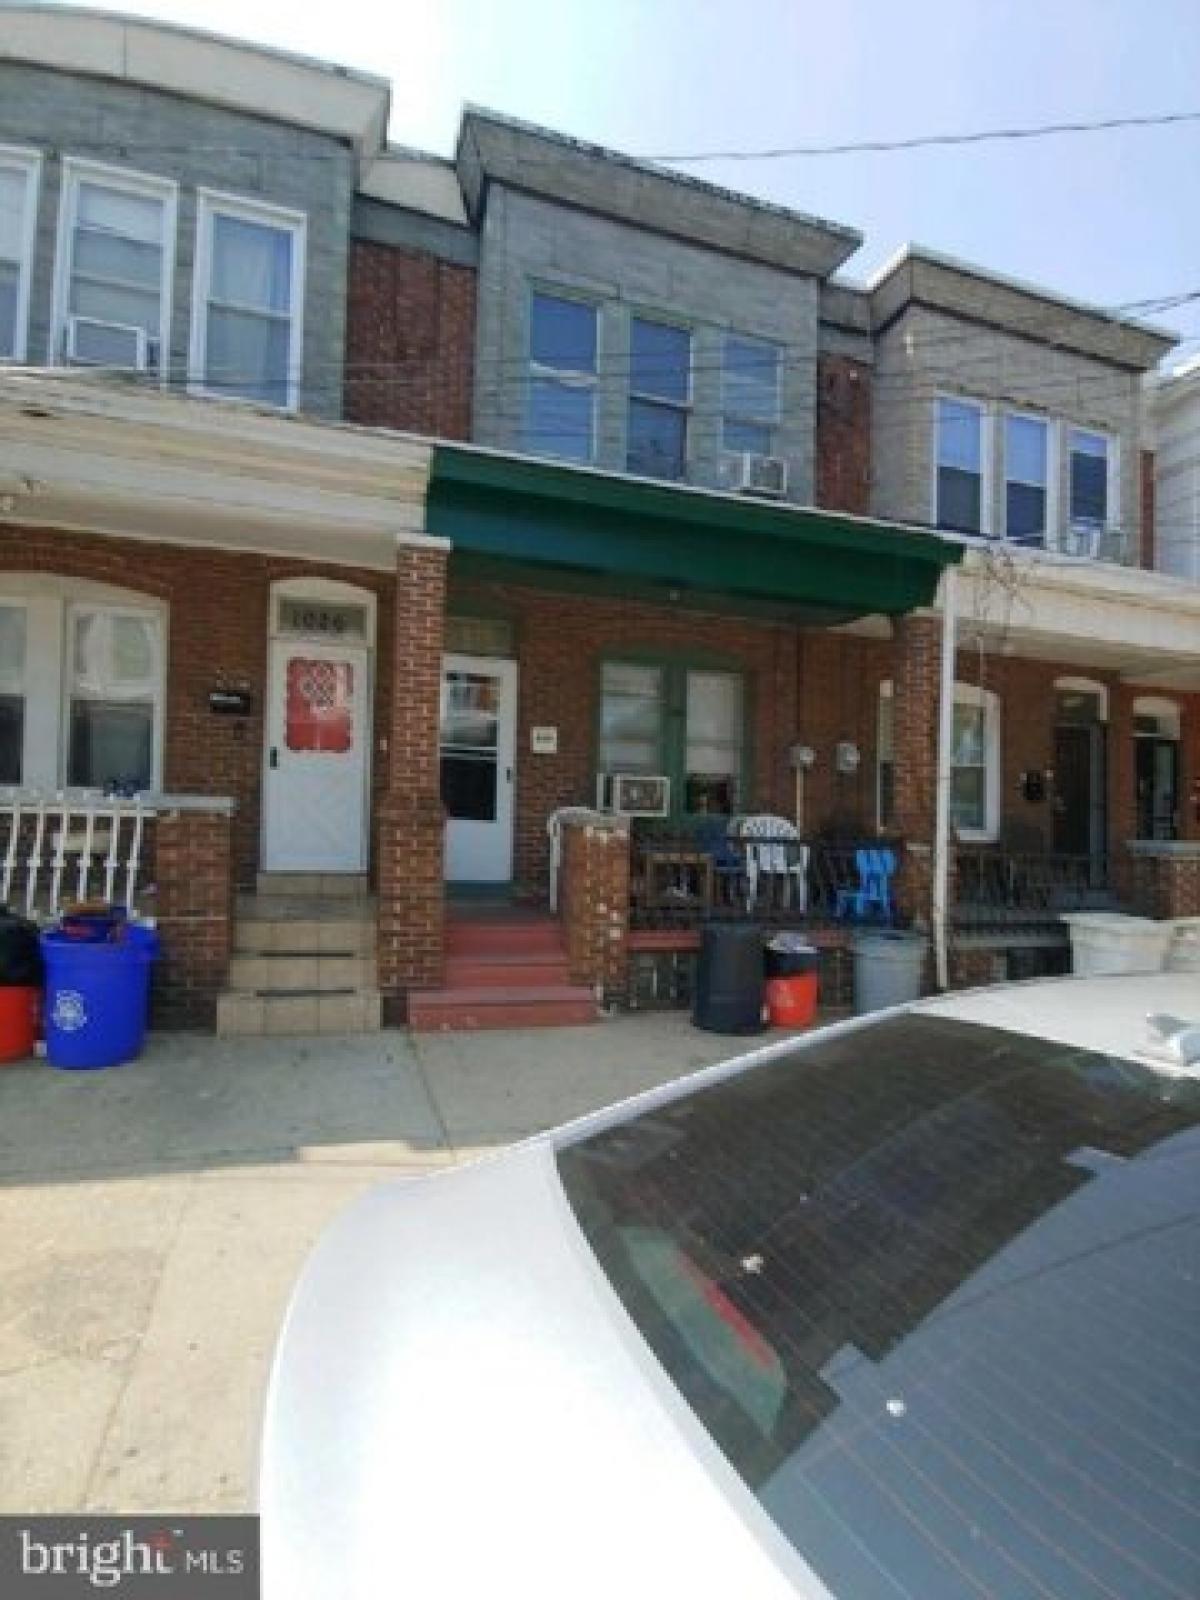 Picture of Home For Sale in Camden, New Jersey, United States